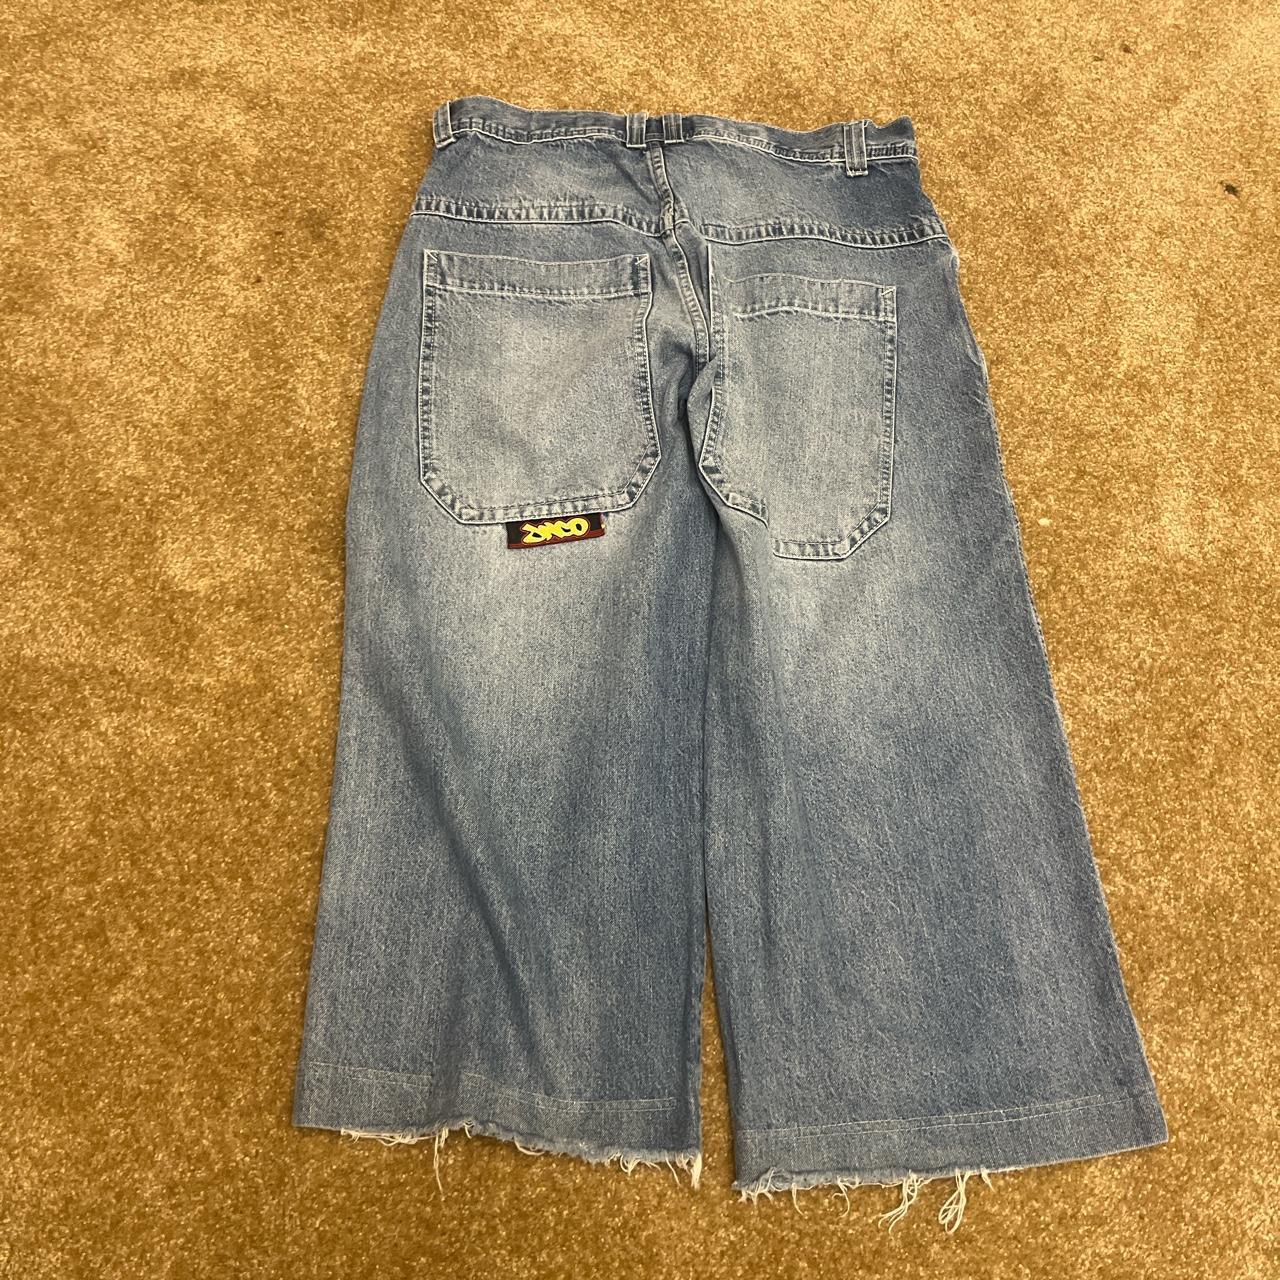 JESTER JNCO JEANS these arent on the jnco website... - Depop